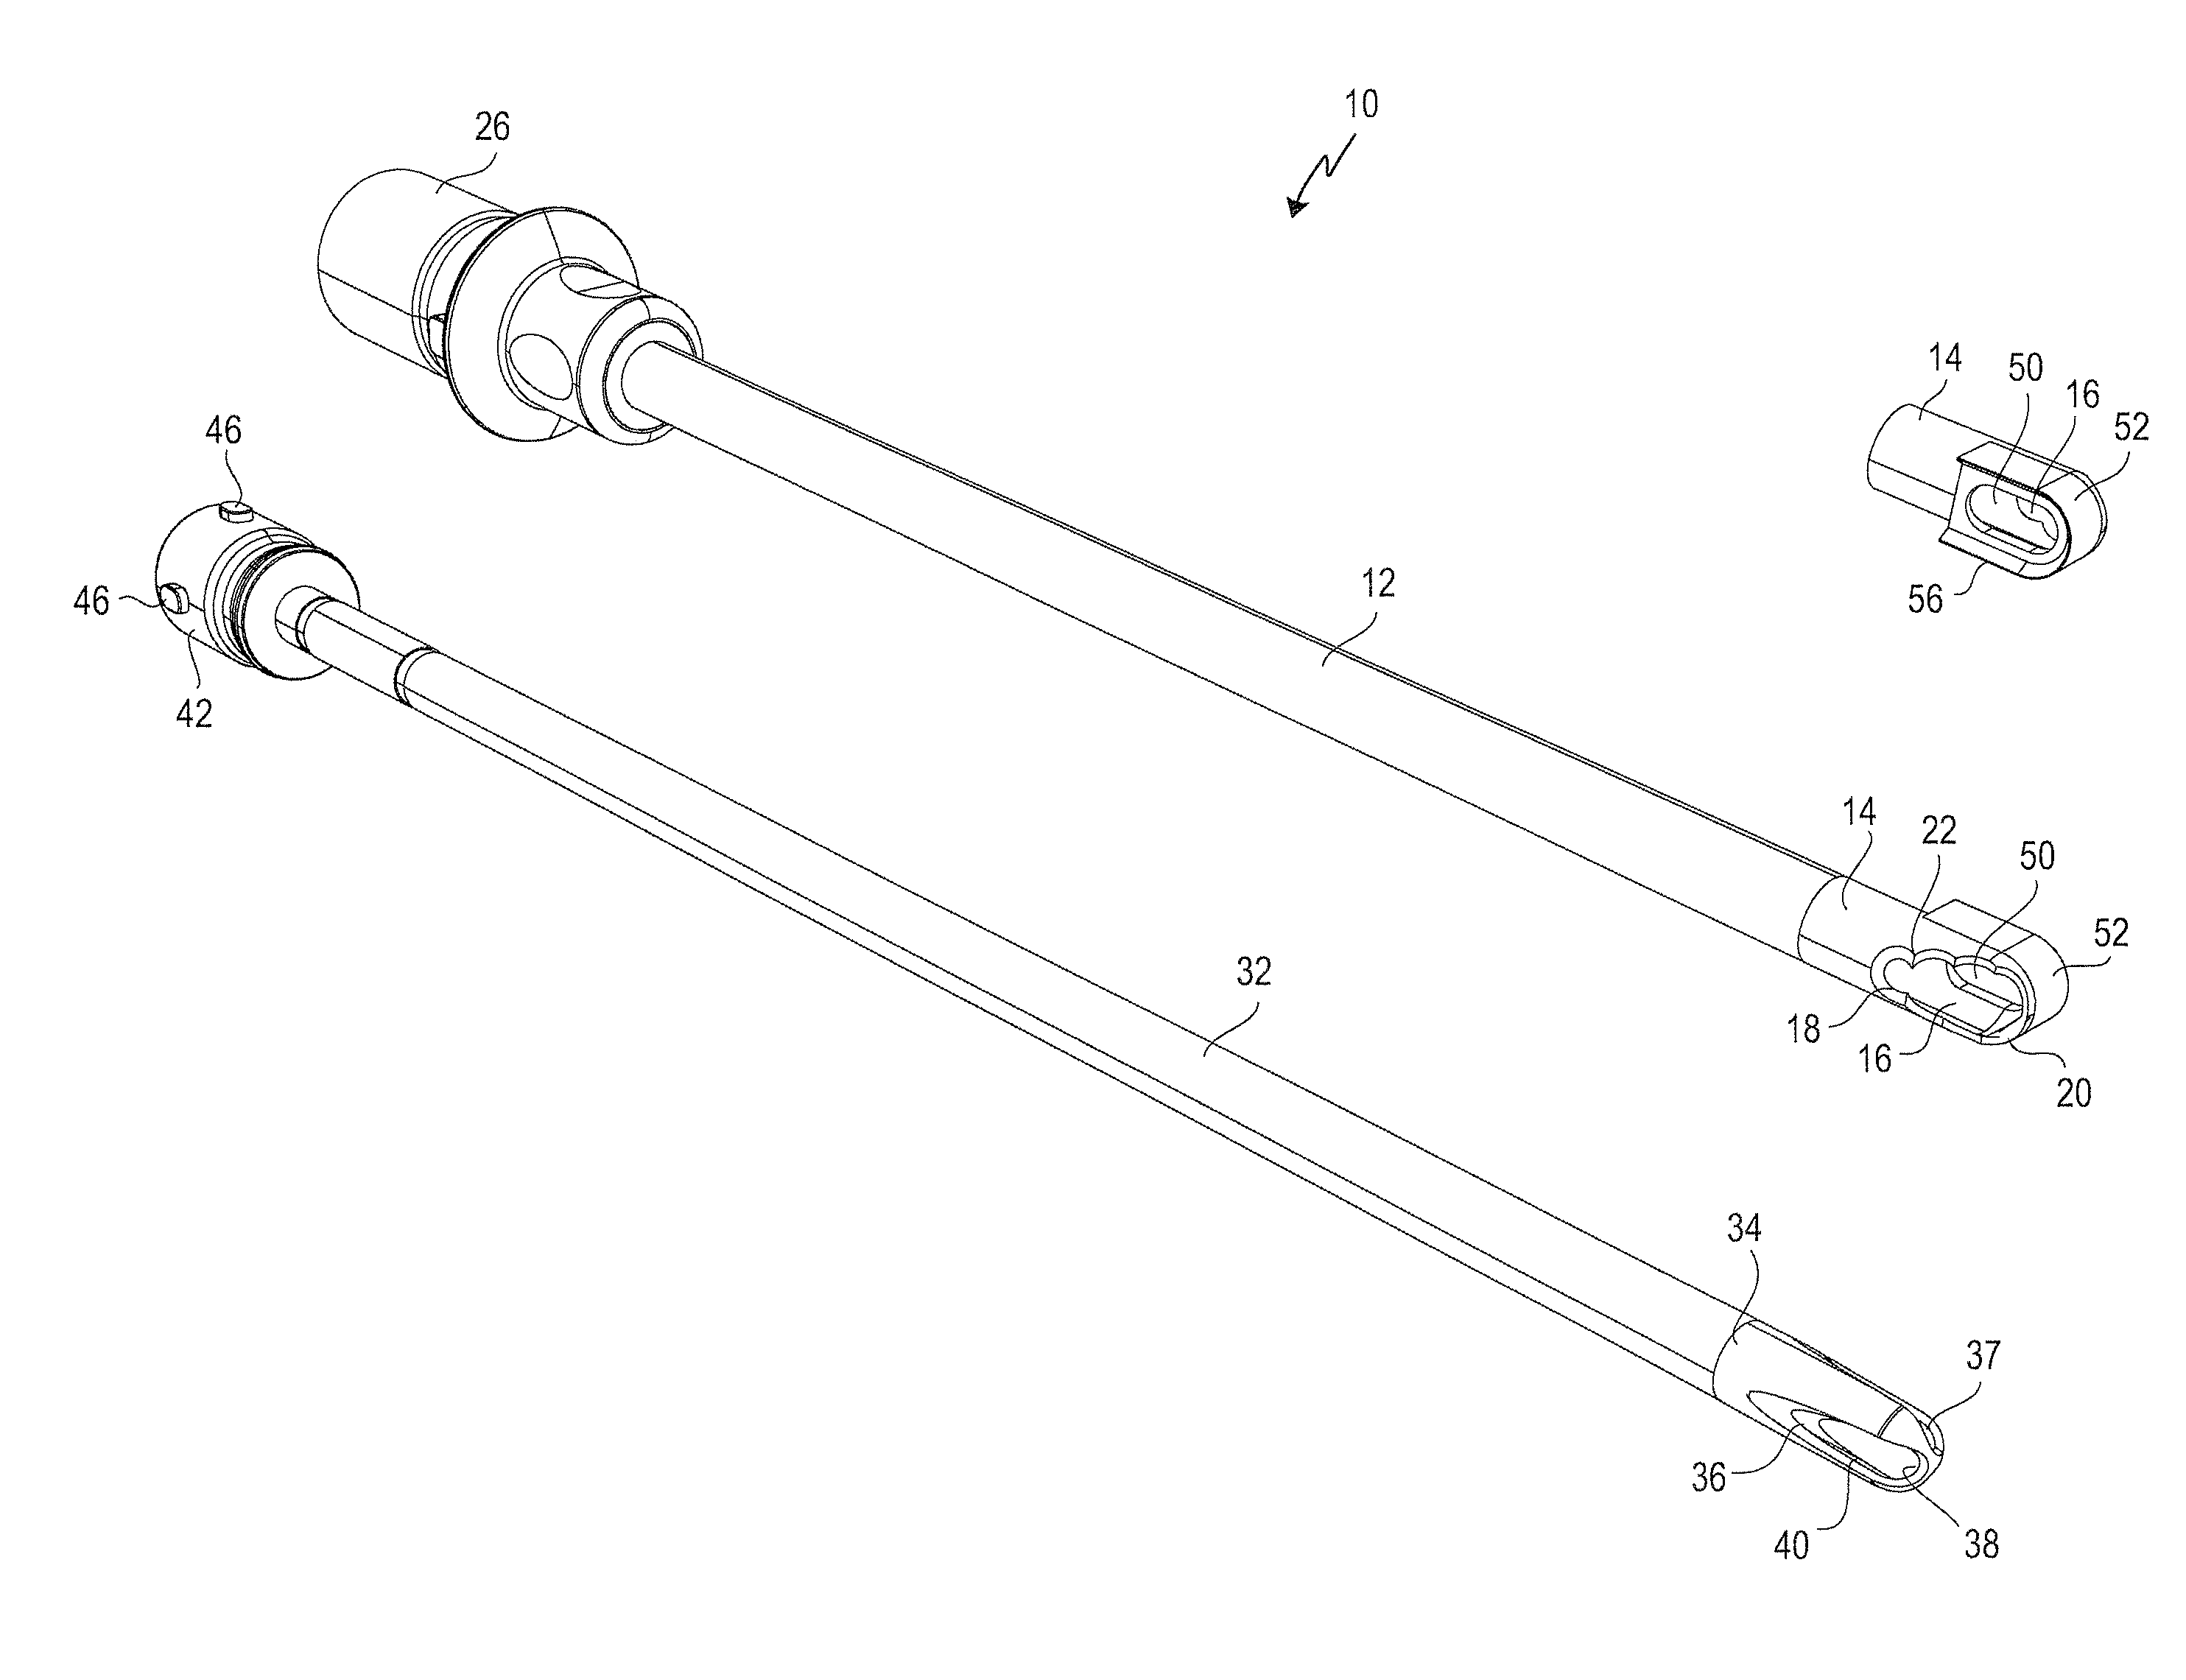 Medical Instrument For Cutting Off Tissue And Cartilage From A Human Or Animal Body